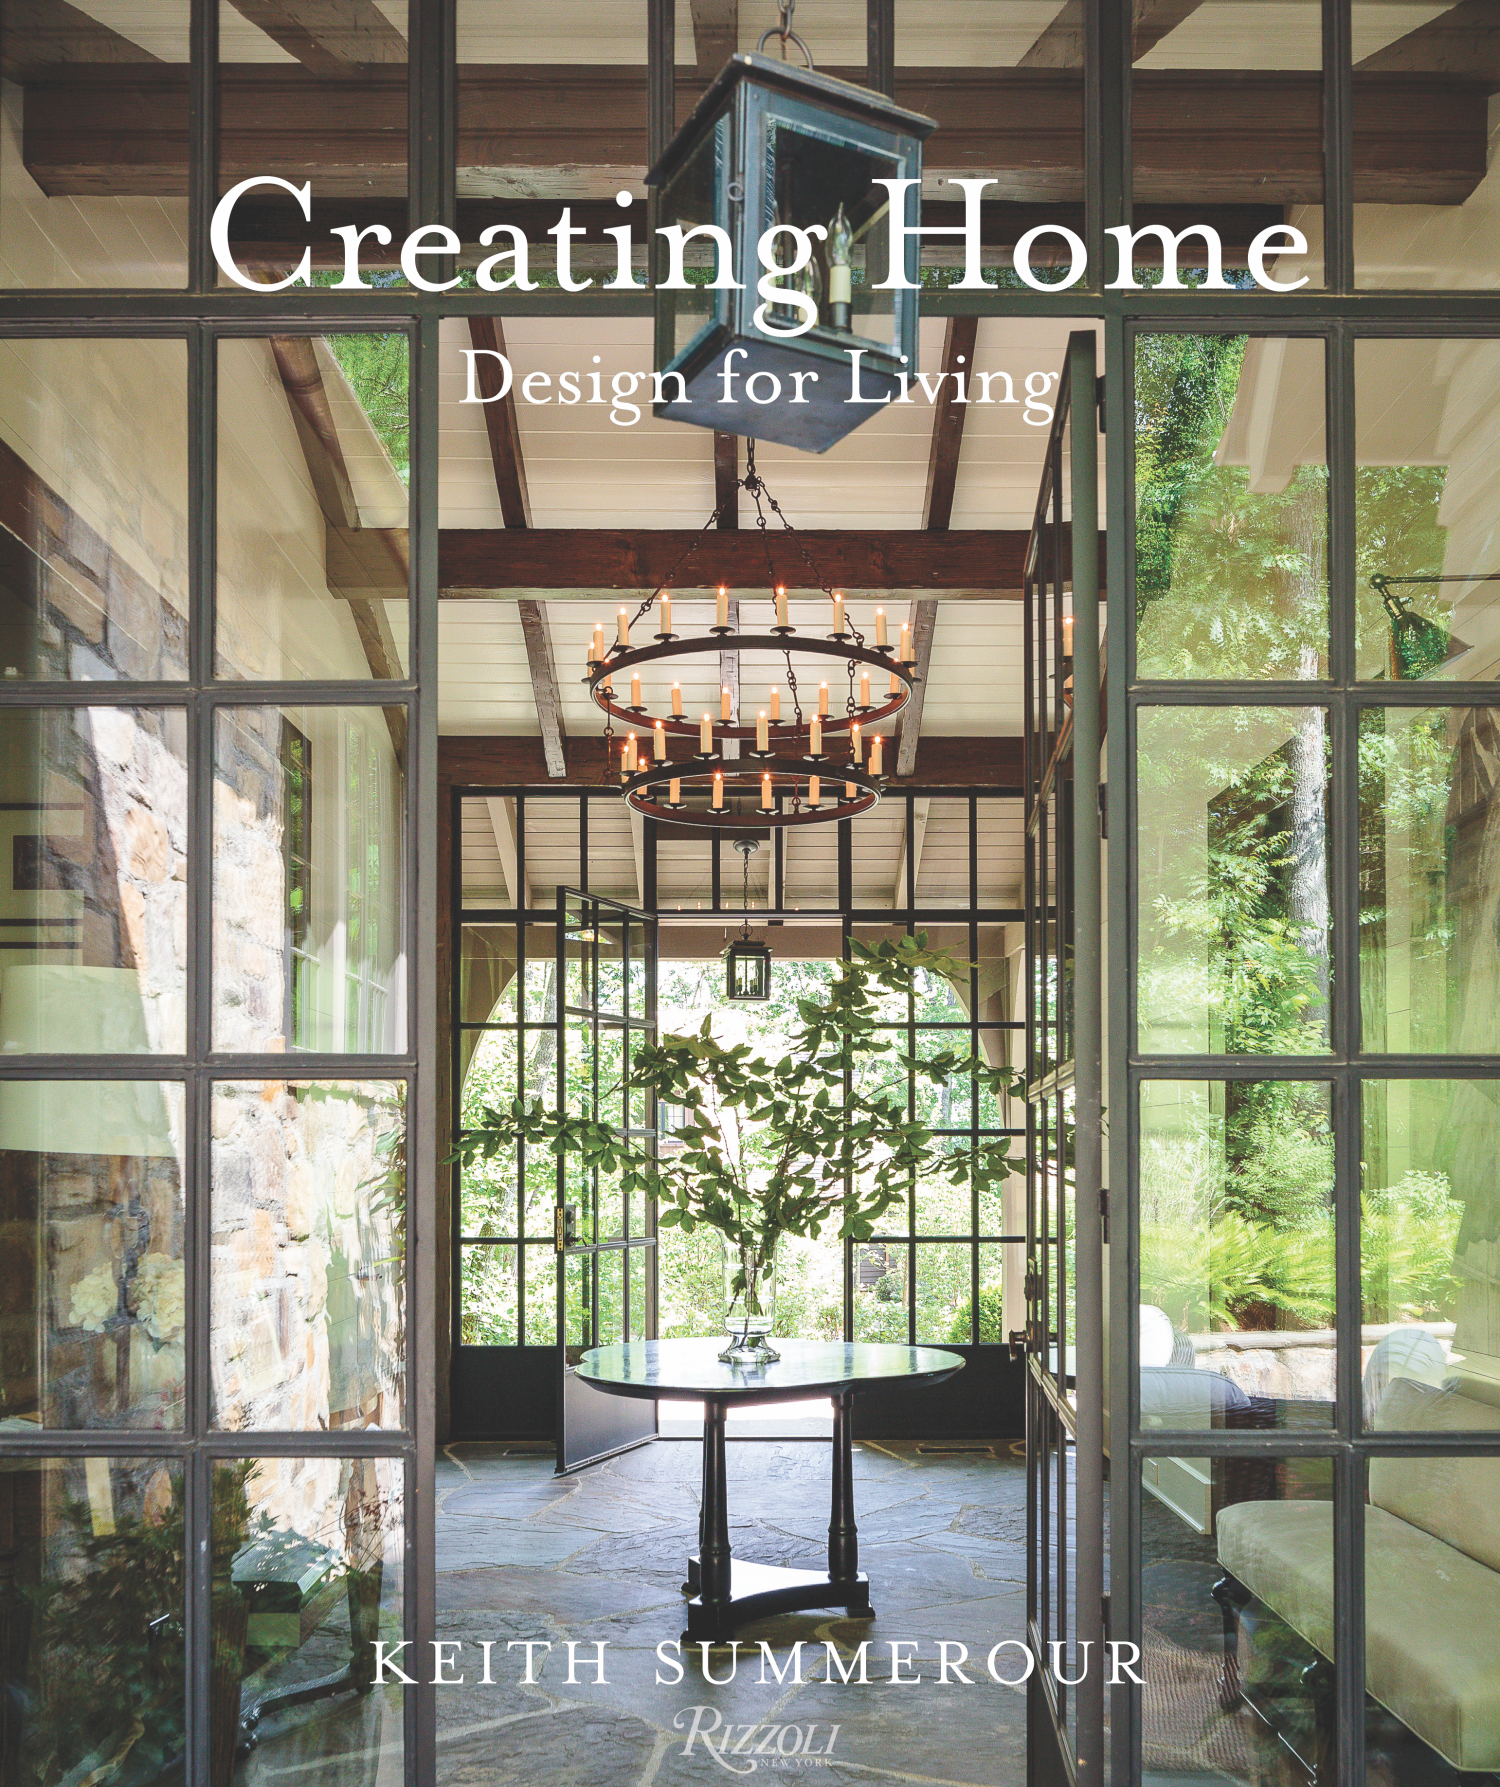 book cover for Creating Home: Design For Living by Keith Summerour (Rizzoli New York, 2017)